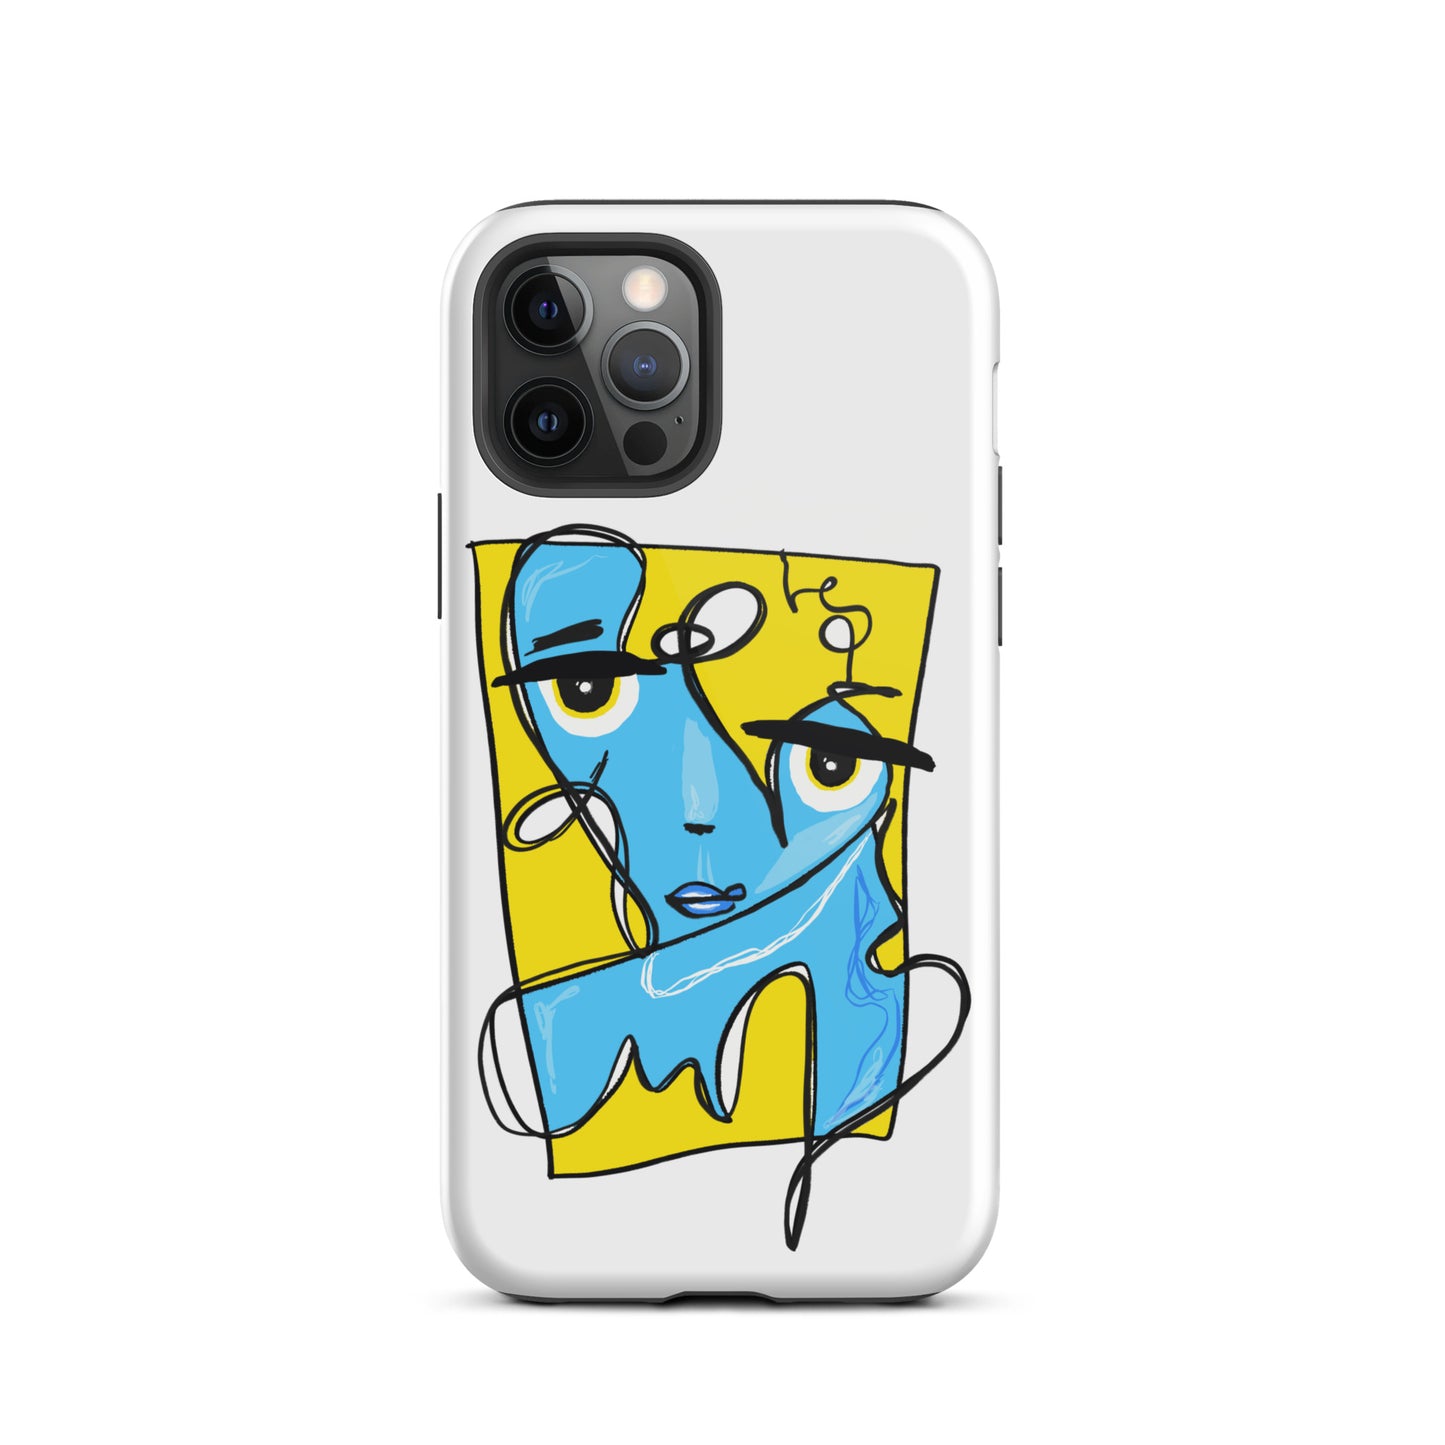 Stylish blue and yellow iPhone case